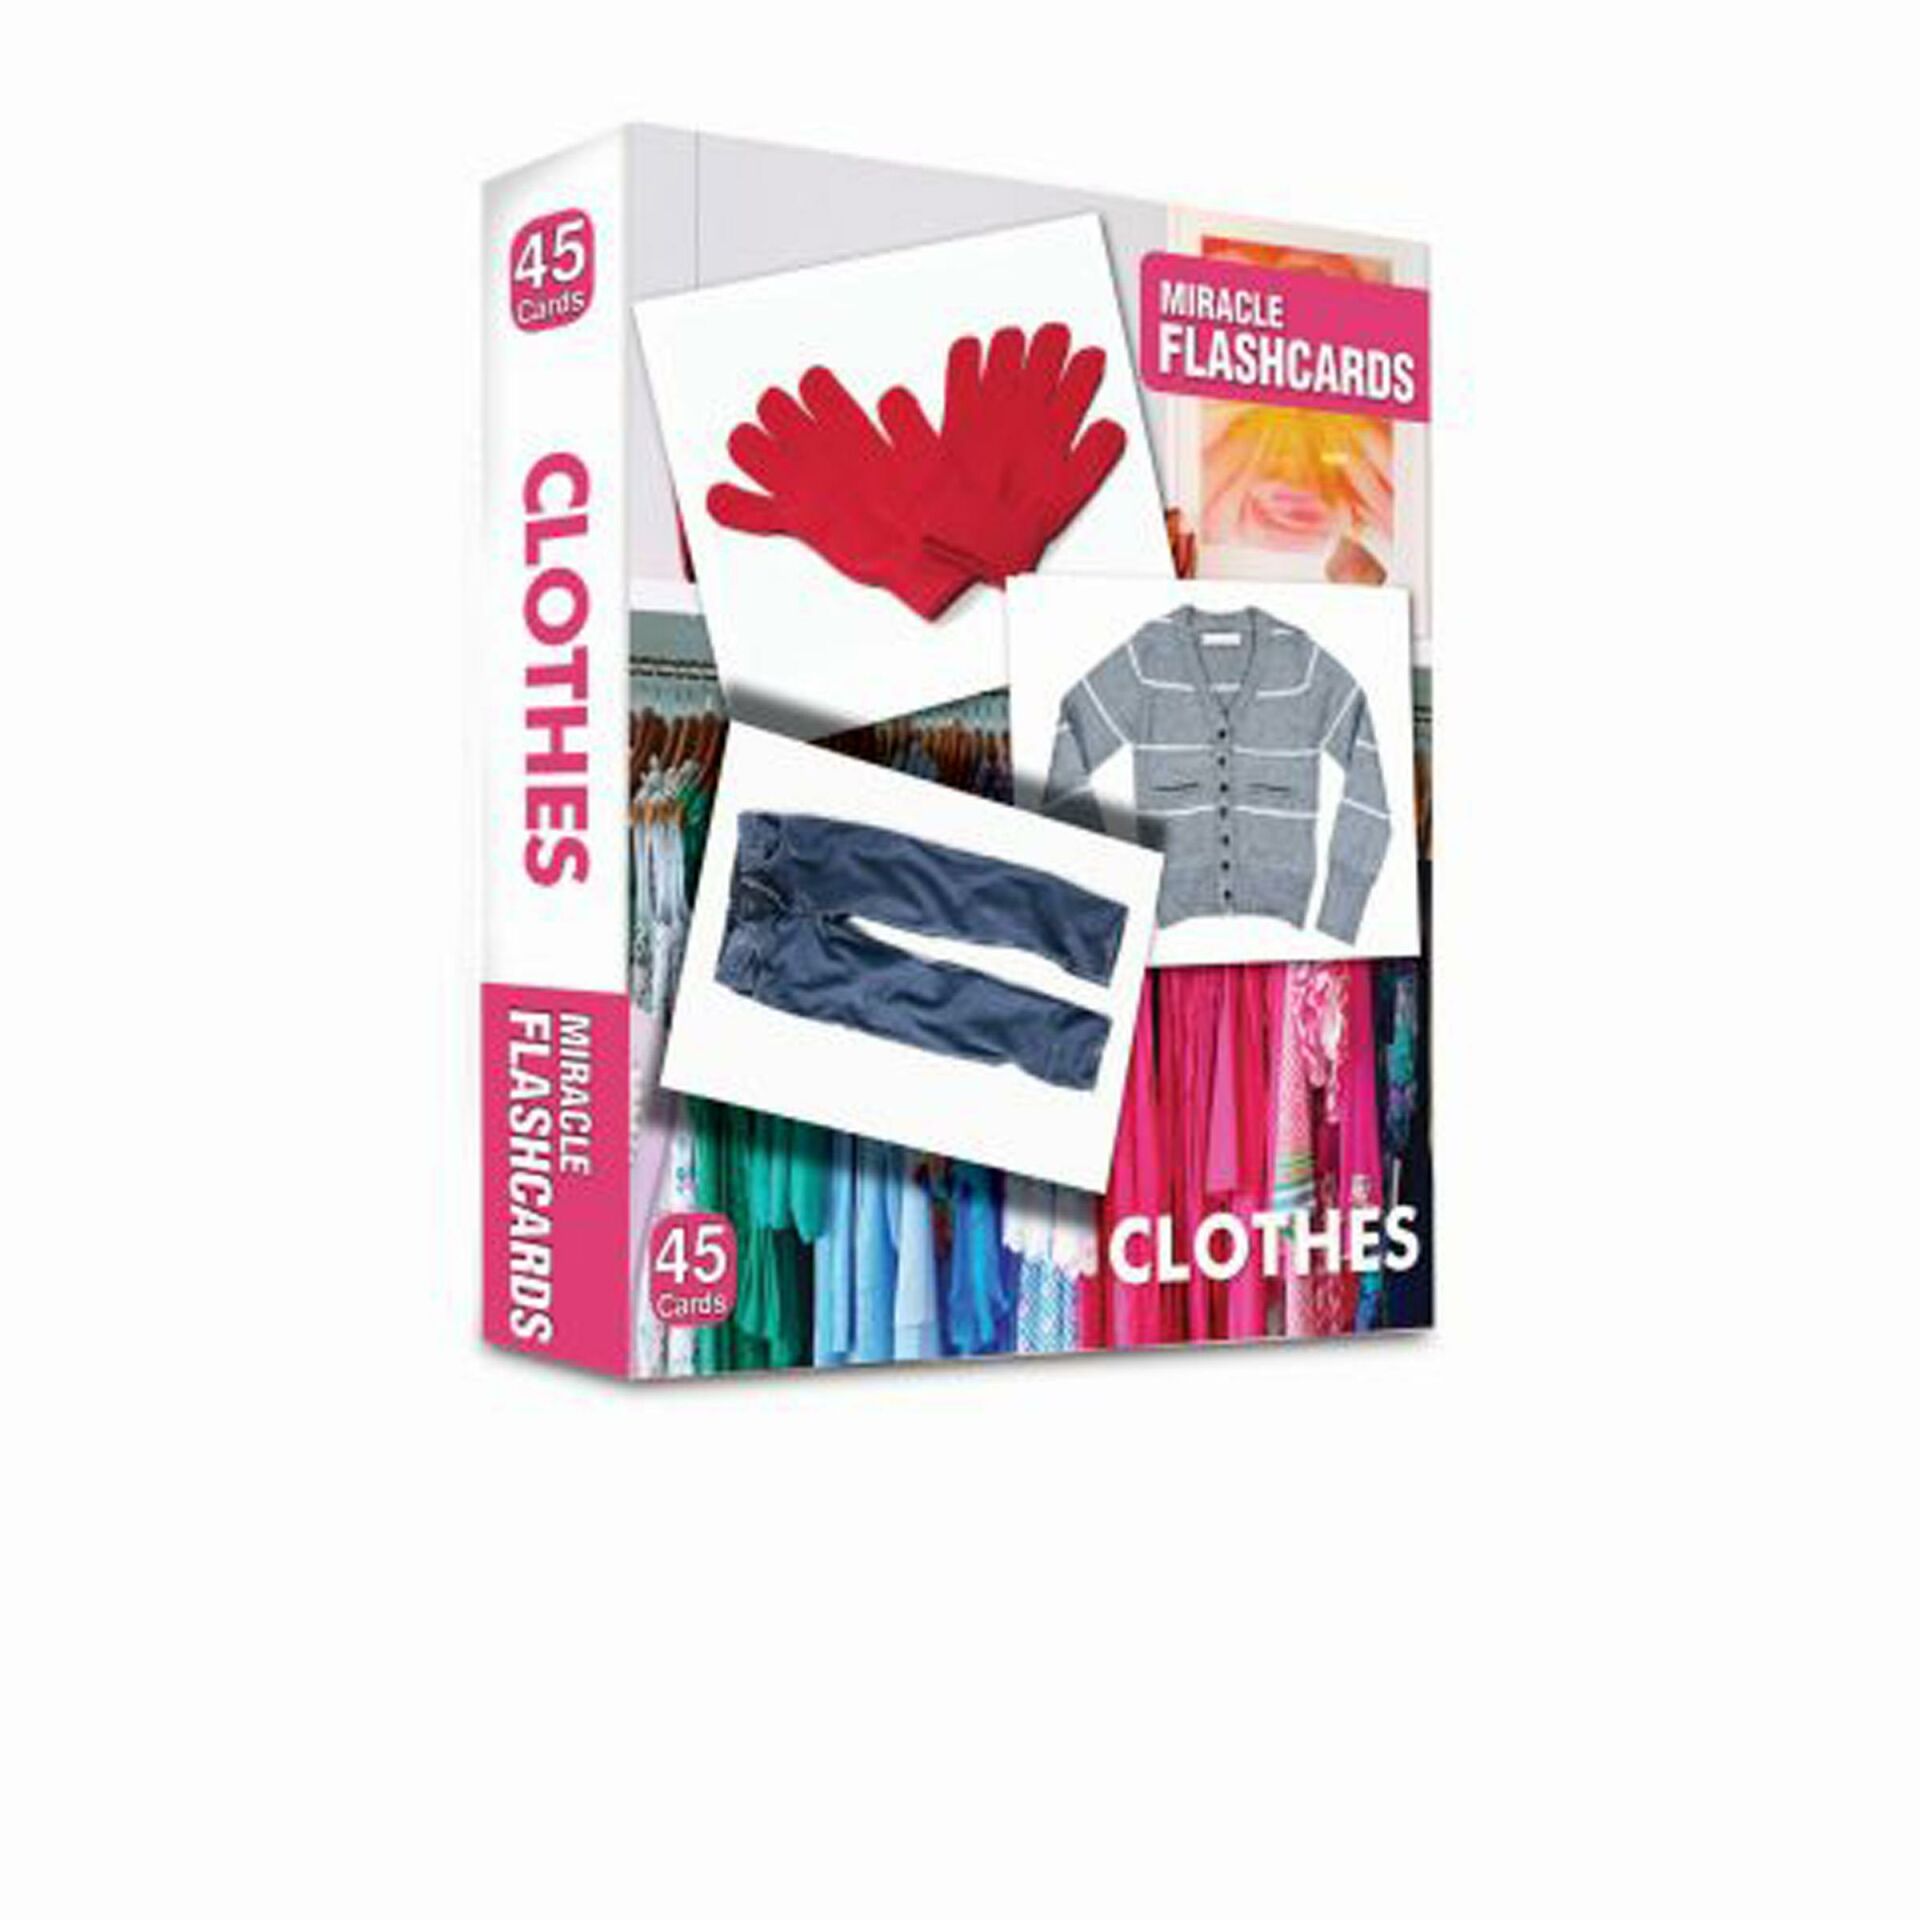 Clothes Miracle Flashcards 45 Cards